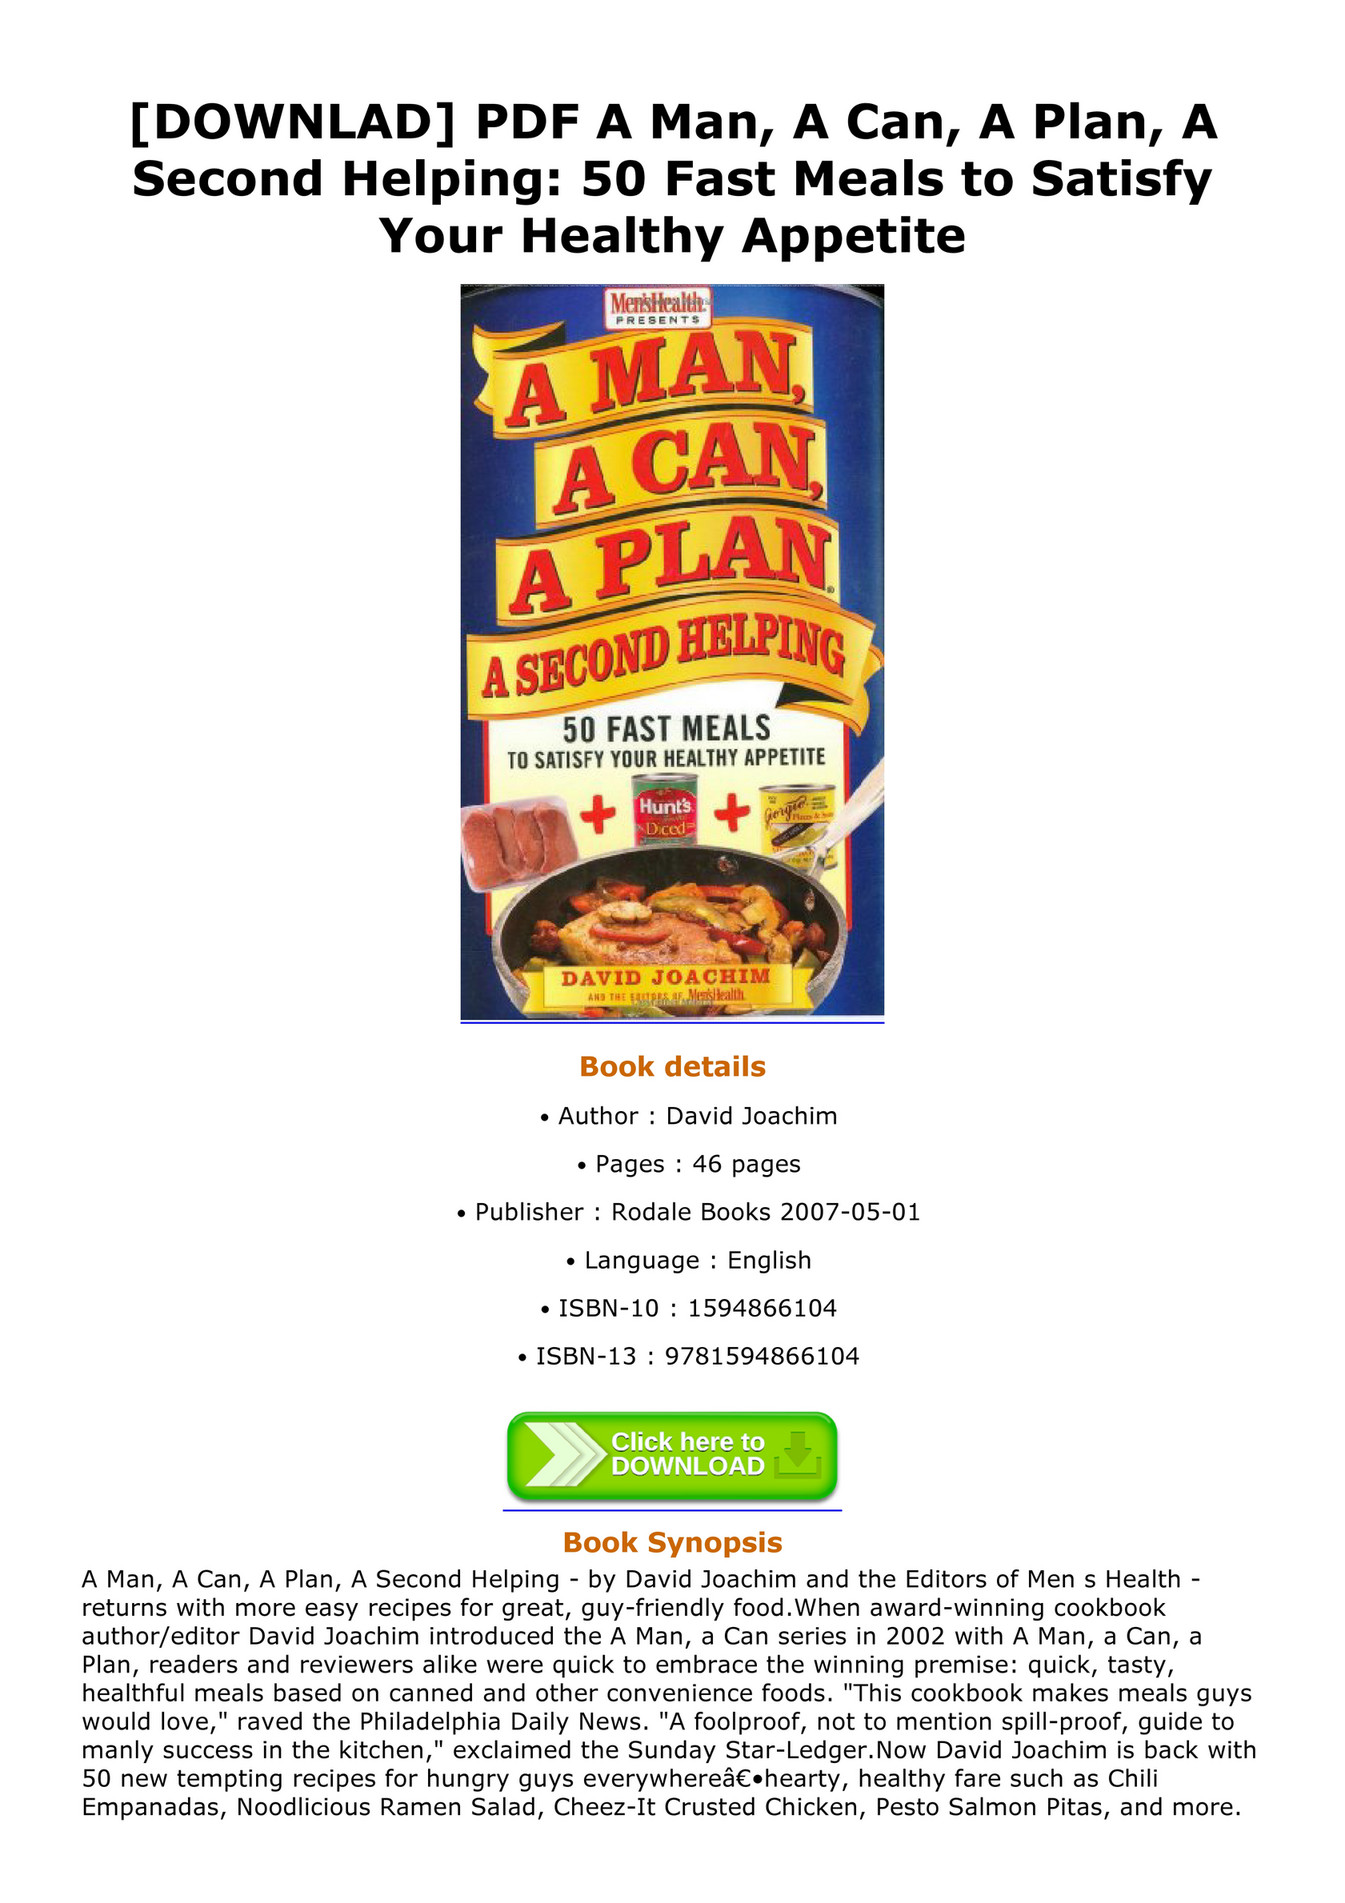 A man a can and a plan pdf download download browser windows 10